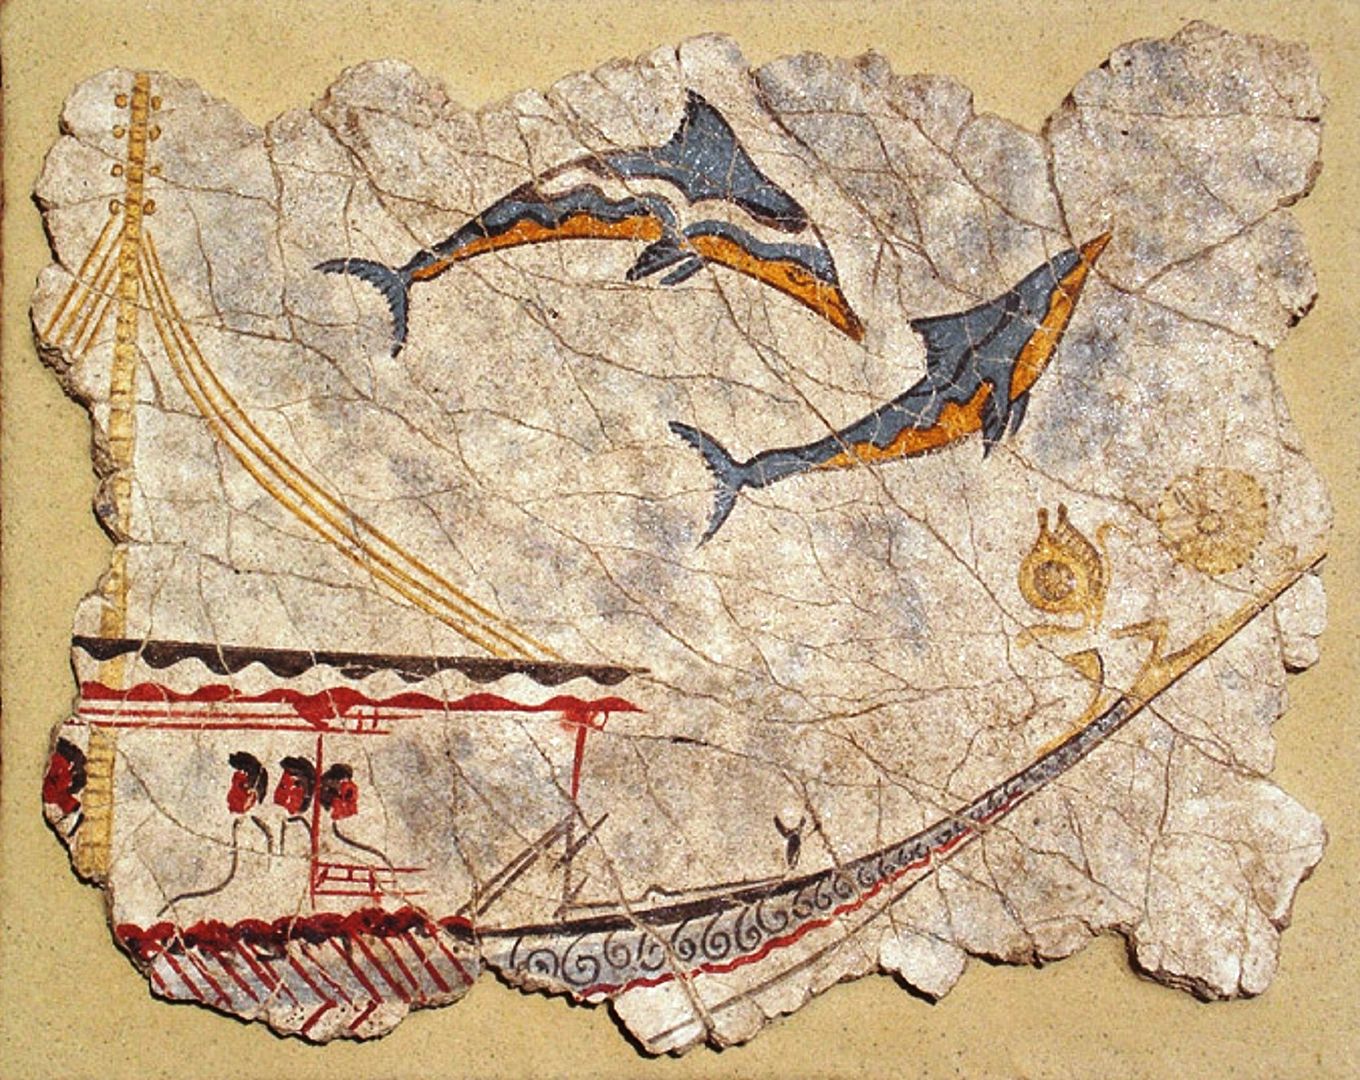 ship-with-dolphins-wall-painting-replica-from-akrotiri-excavation-ancient-greek-painting-greece-santorini-17th-century-bc_zps37379cad.jpg